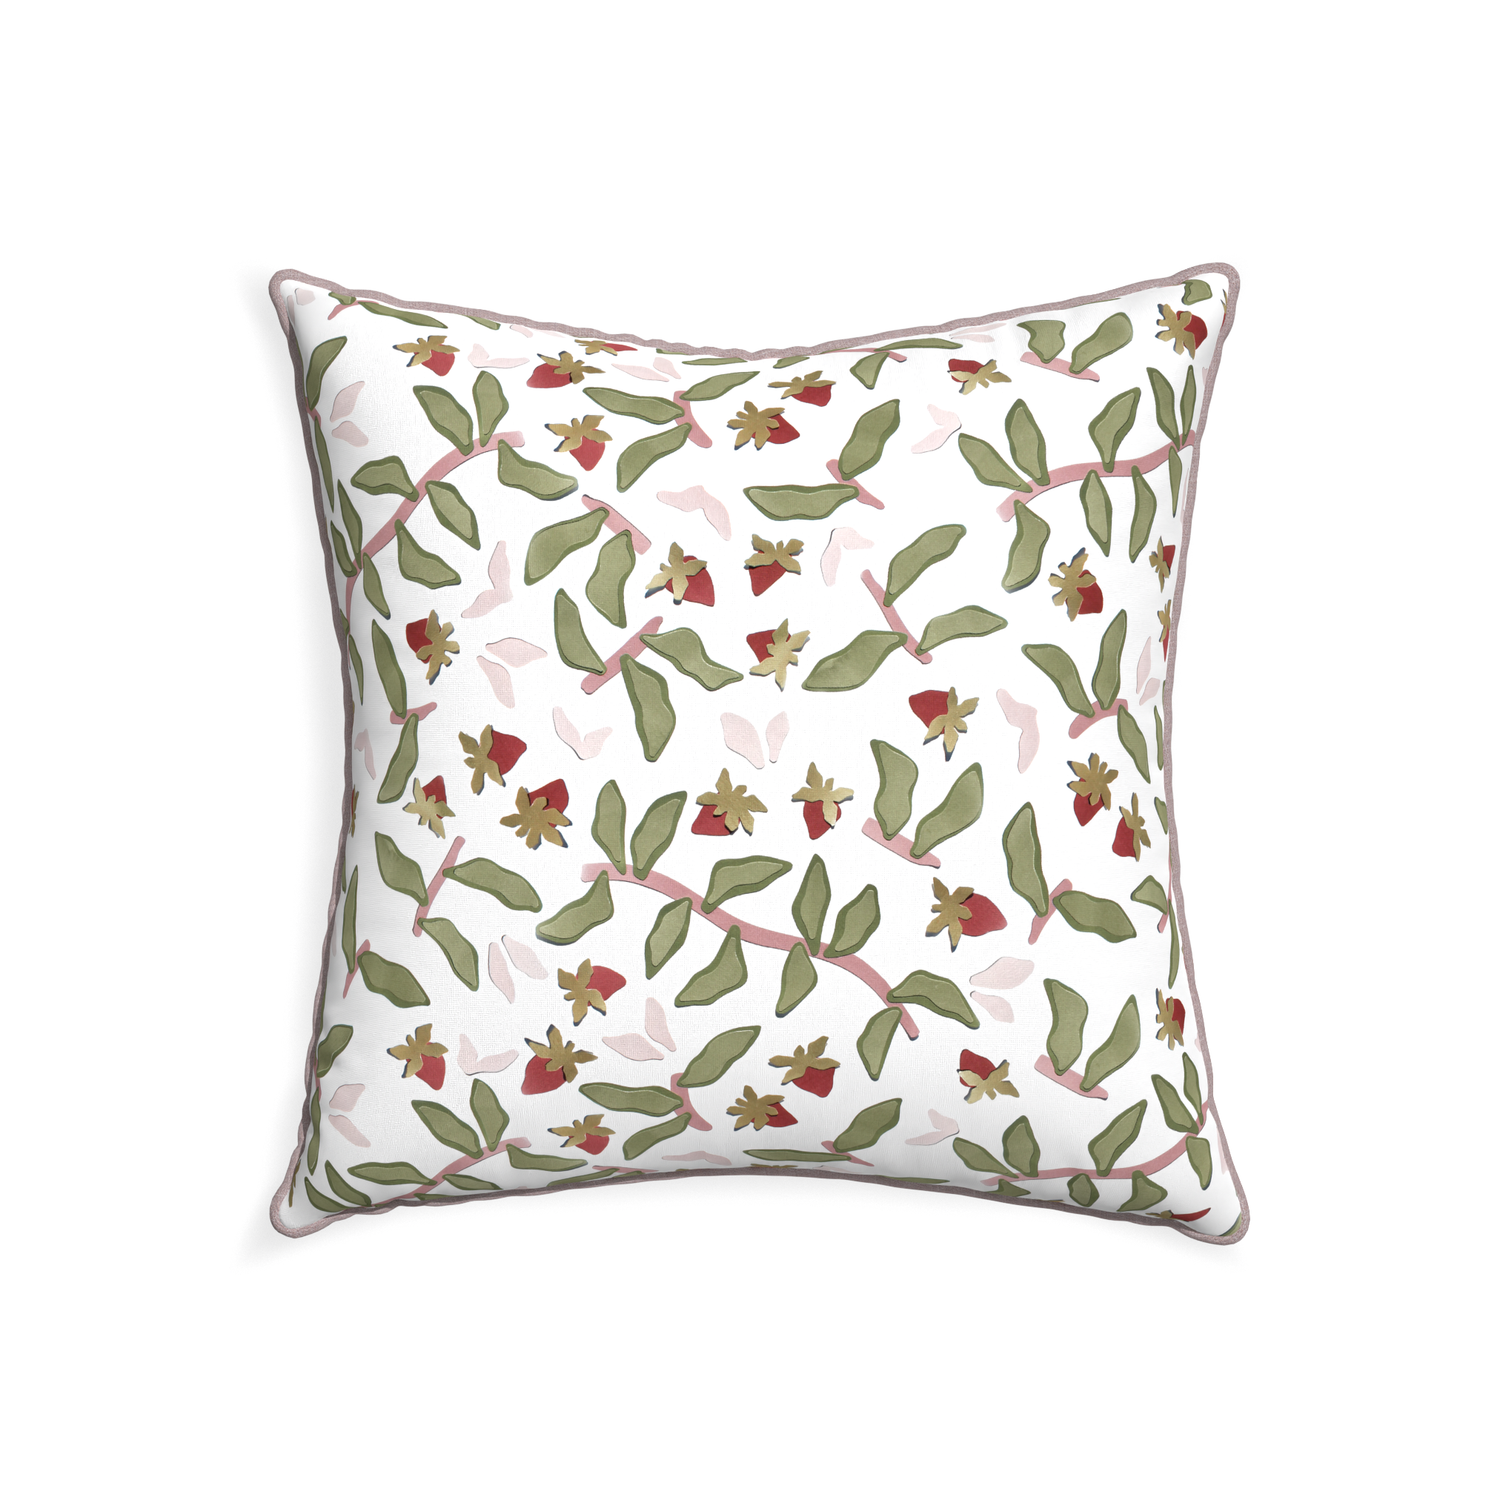 22-square nellie custom strawberry & botanicalpillow with orchid piping on white background